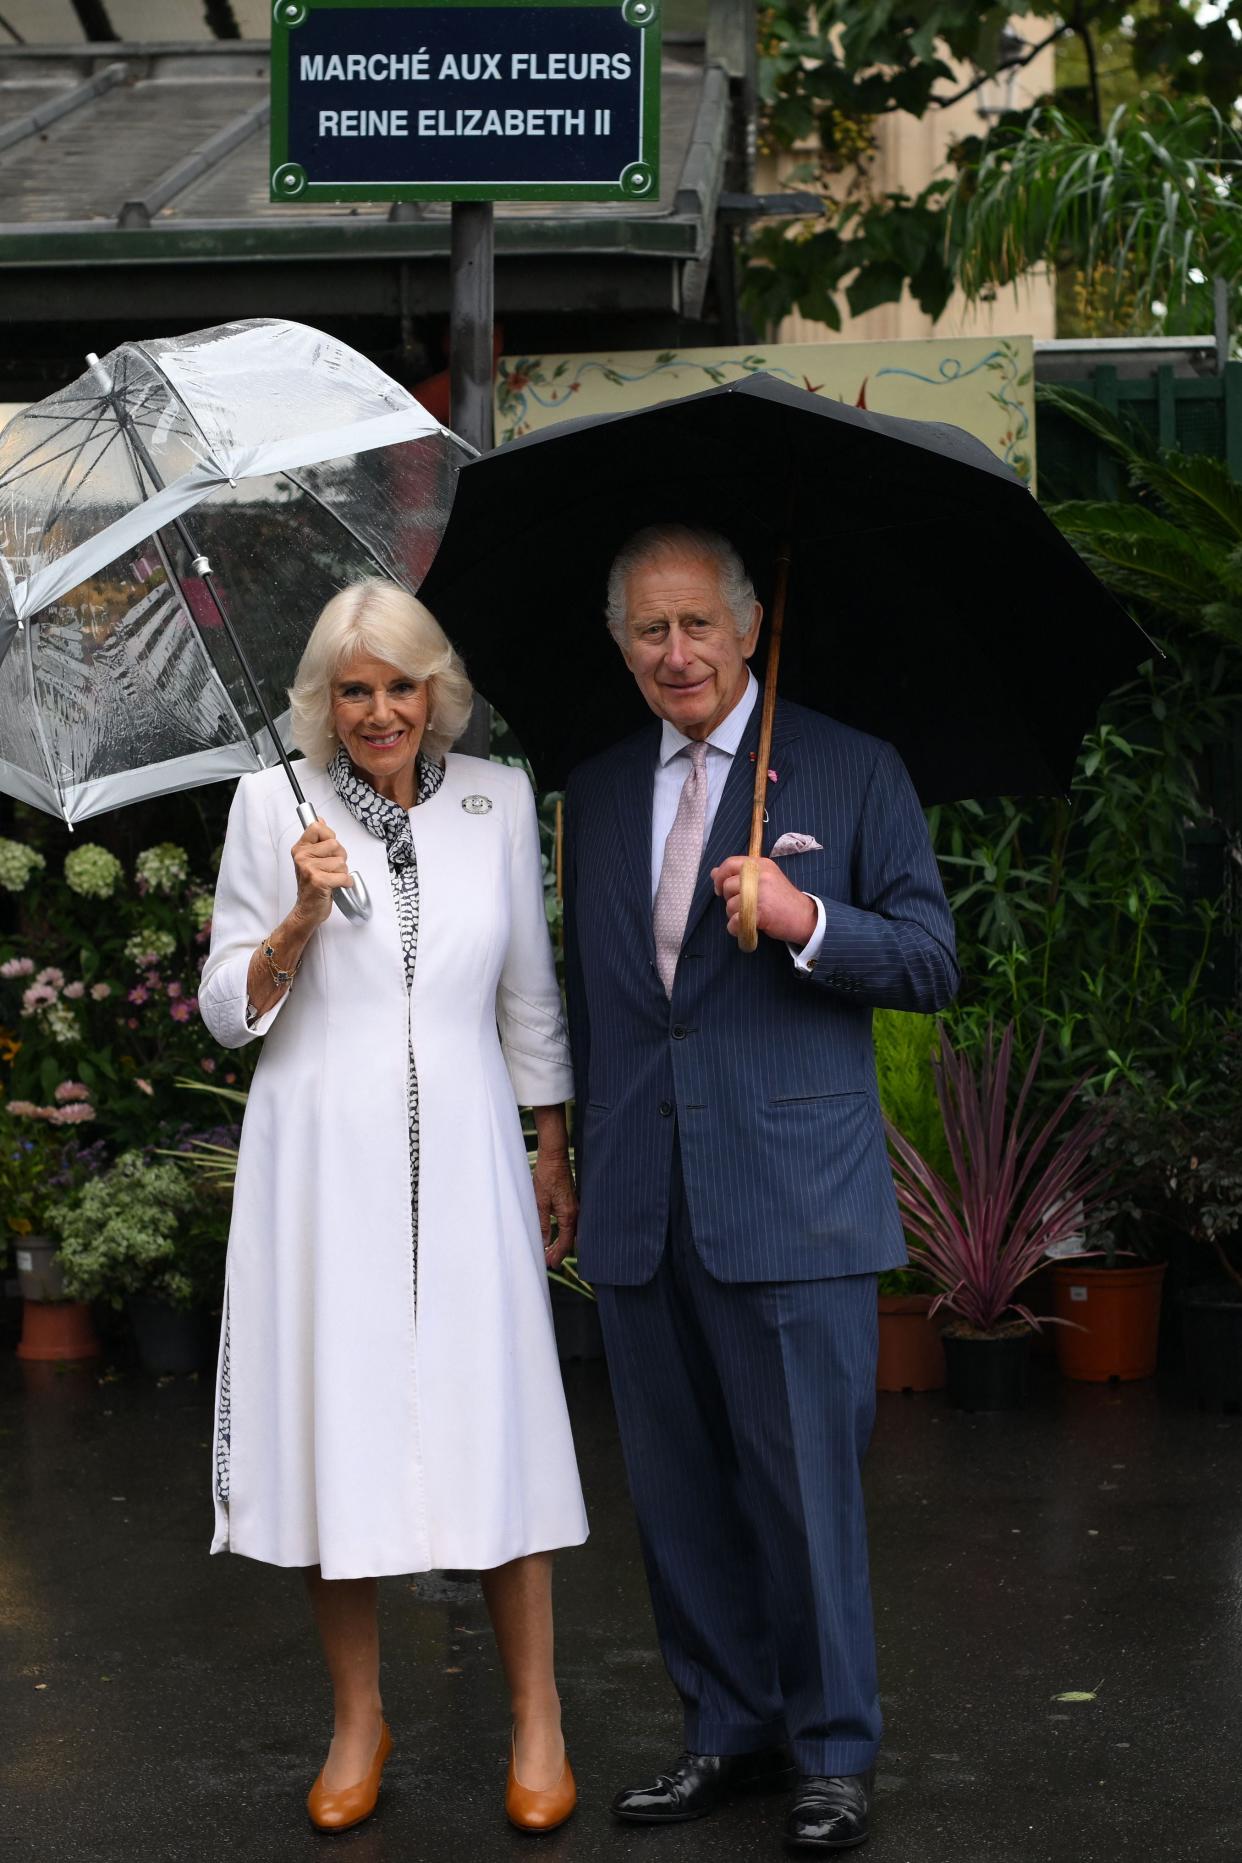 Brollies up - King Charles III and his wife Queen Camilla arrive to visit the central Paris Flower Market, named after her late Majesty Queen Elizabeth II (POOL/AFP via Getty Images)